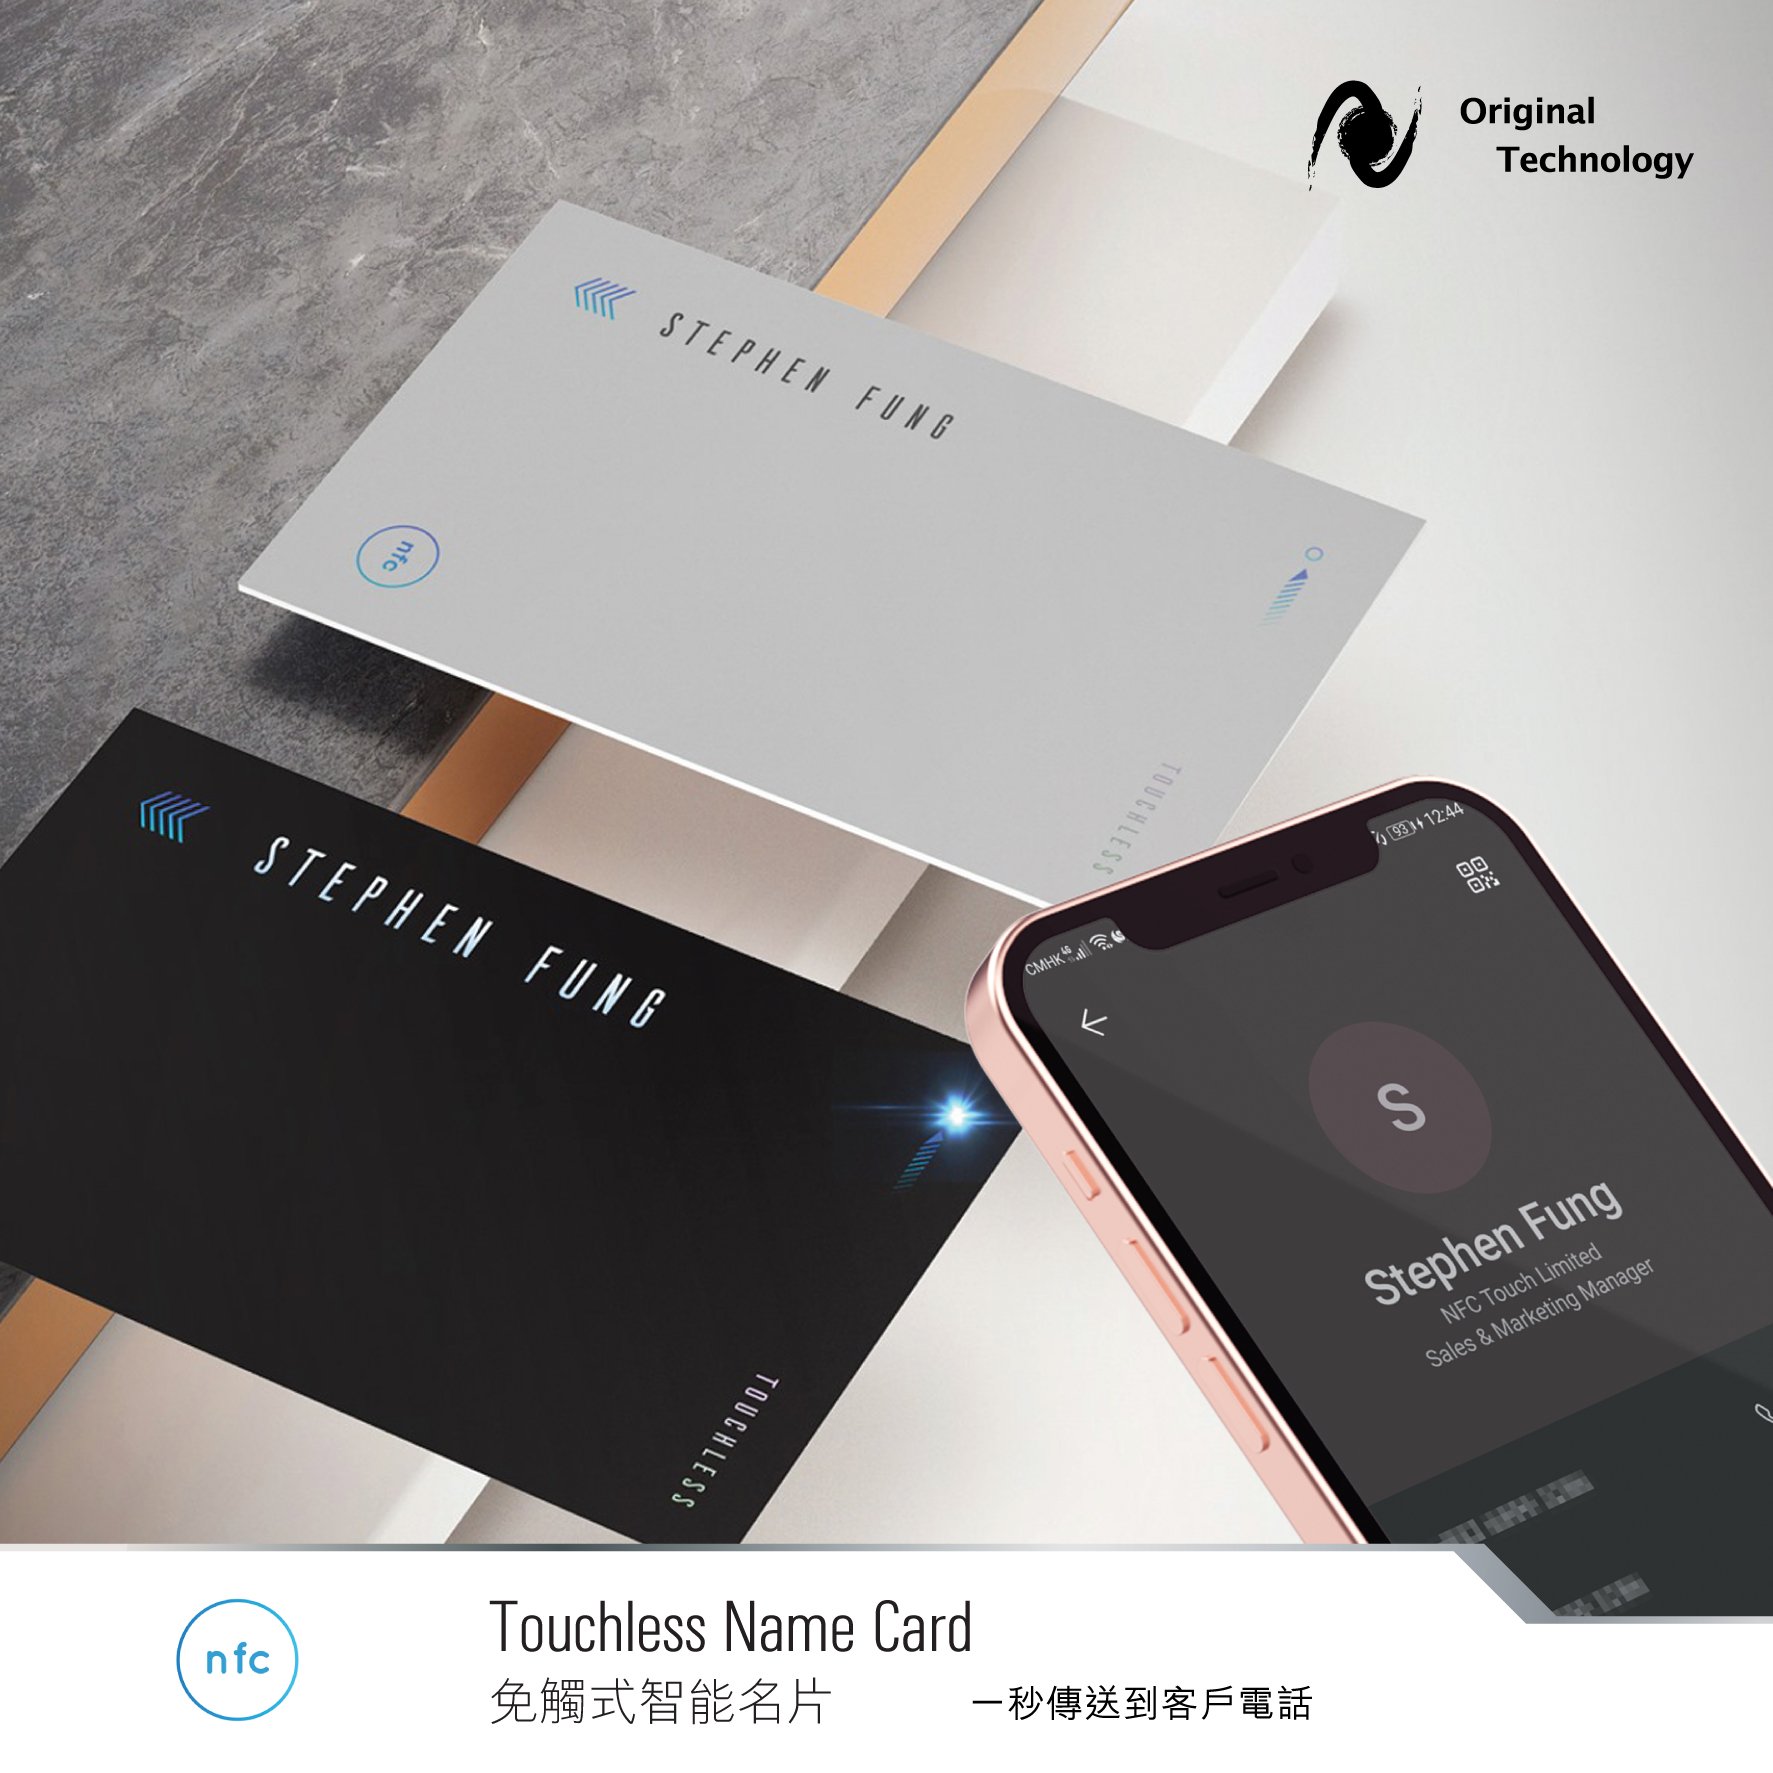 NFC Touch Touchless Card - 見客必備 💼 一見難忘嘅智能名片